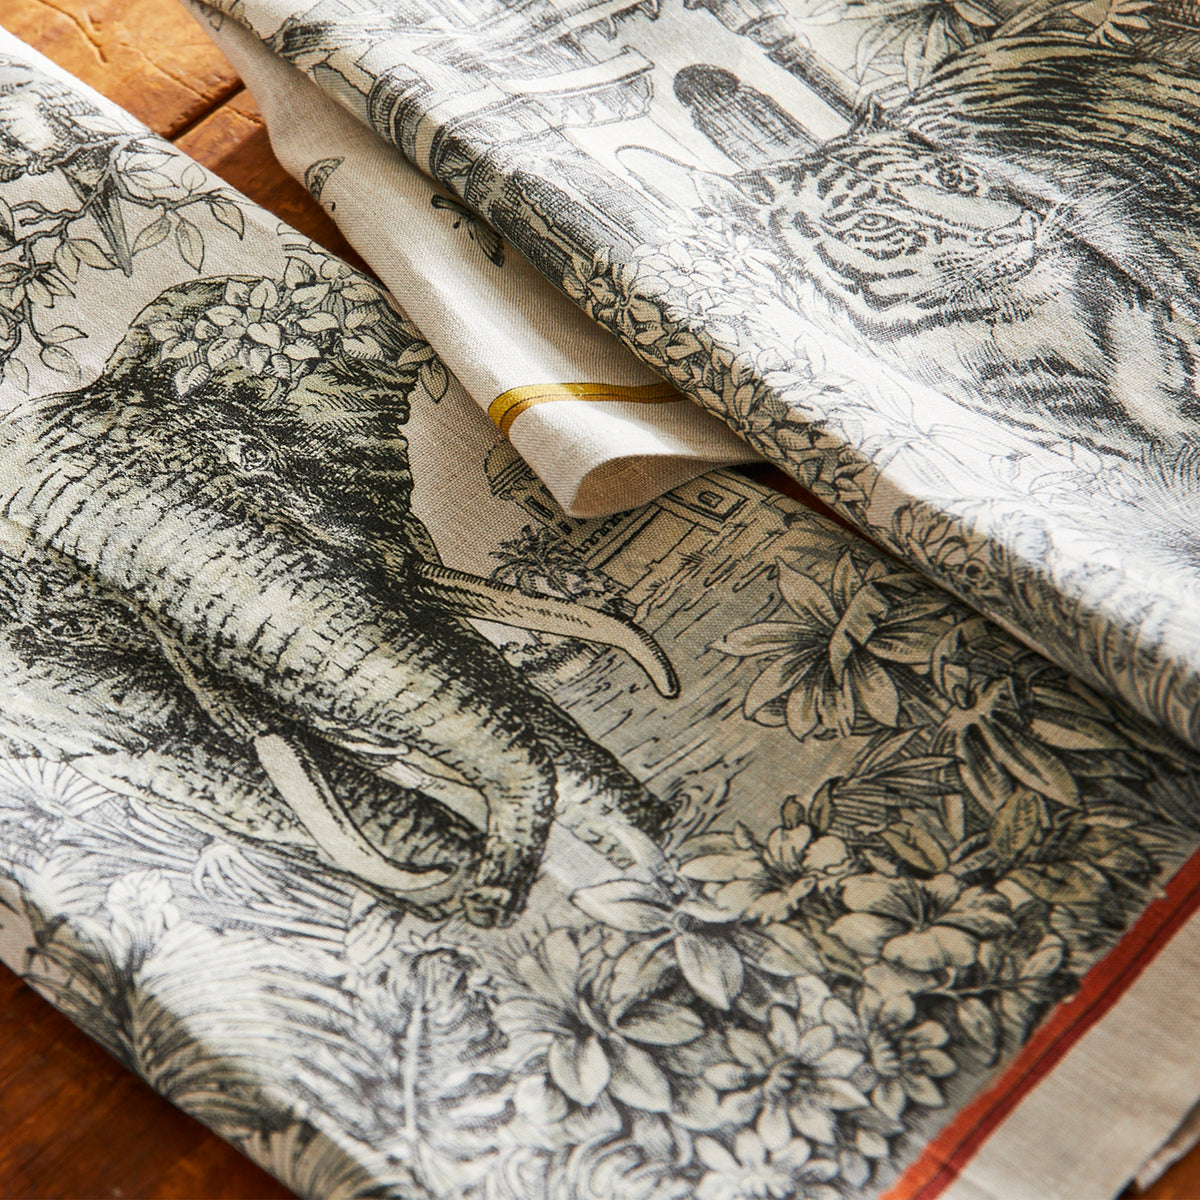 A Morocco Linen Kitchen Towels Set/2 with an elephant on it, perfect for your kitchen in Italy. (Brand: TTT)